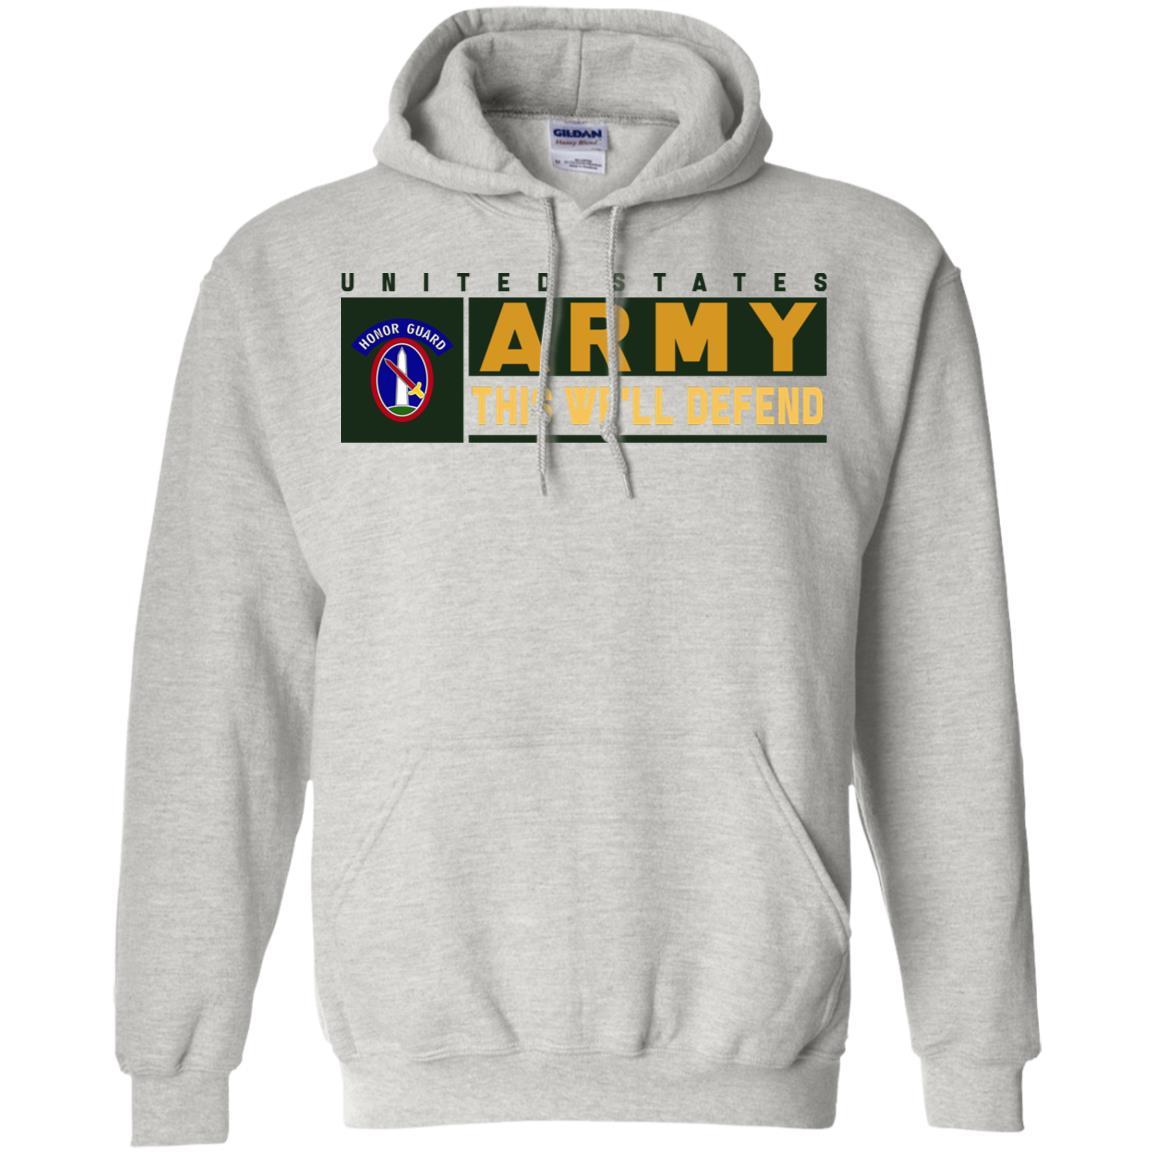 US Army 3RD INFANTRY REGIMENT, MILITARY DISTRICT OF WASHINGTON WITH HONOR GUARD TAB- This We'll Defend T-Shirt On Front For Men-TShirt-Army-Veterans Nation